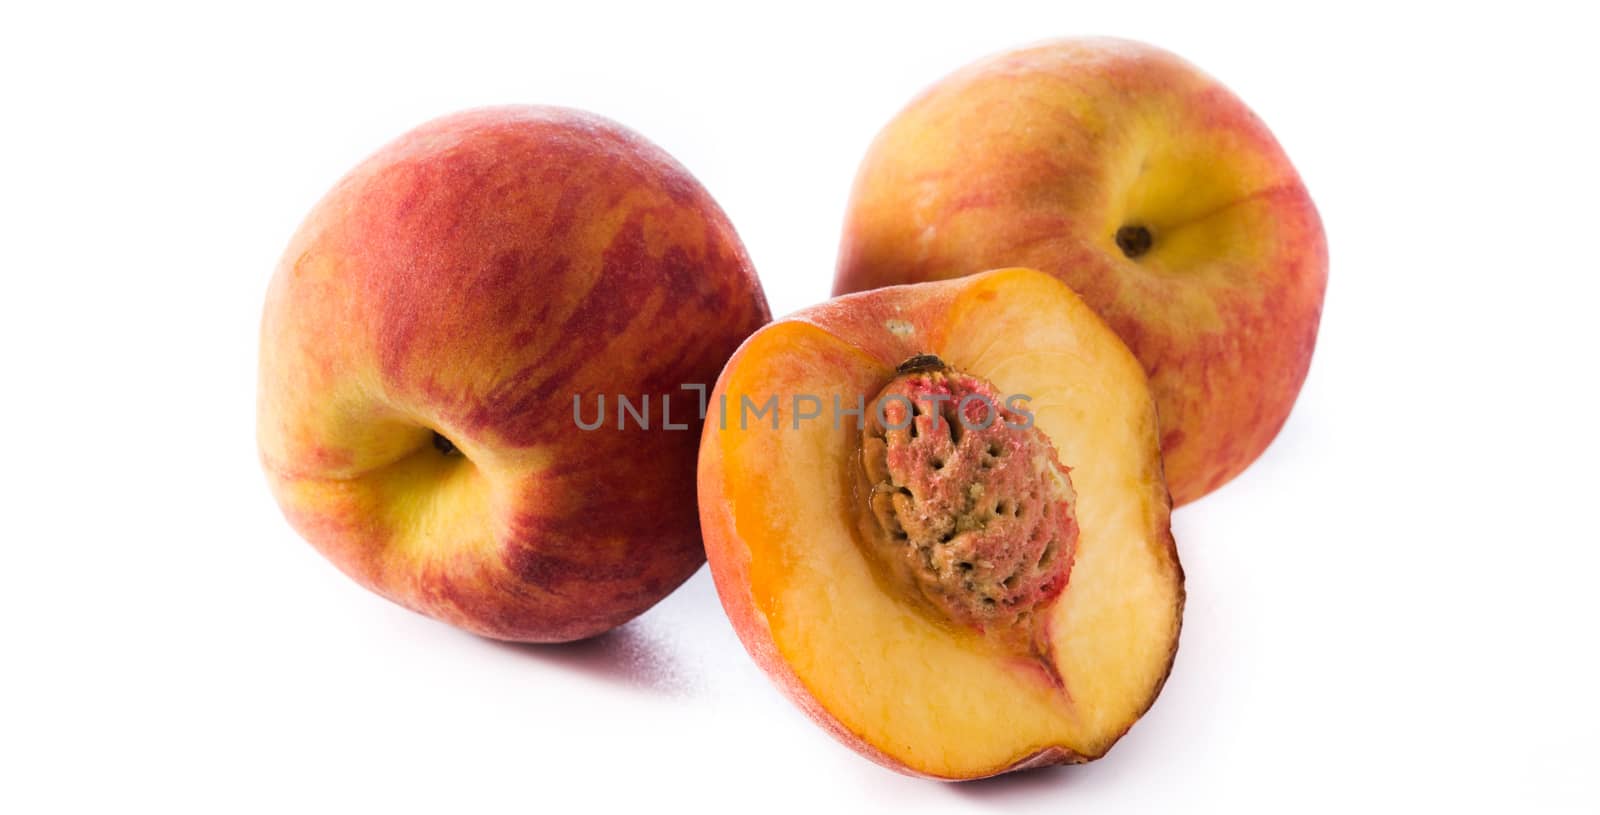 Fresh peach isolated on white background by chandlervid85